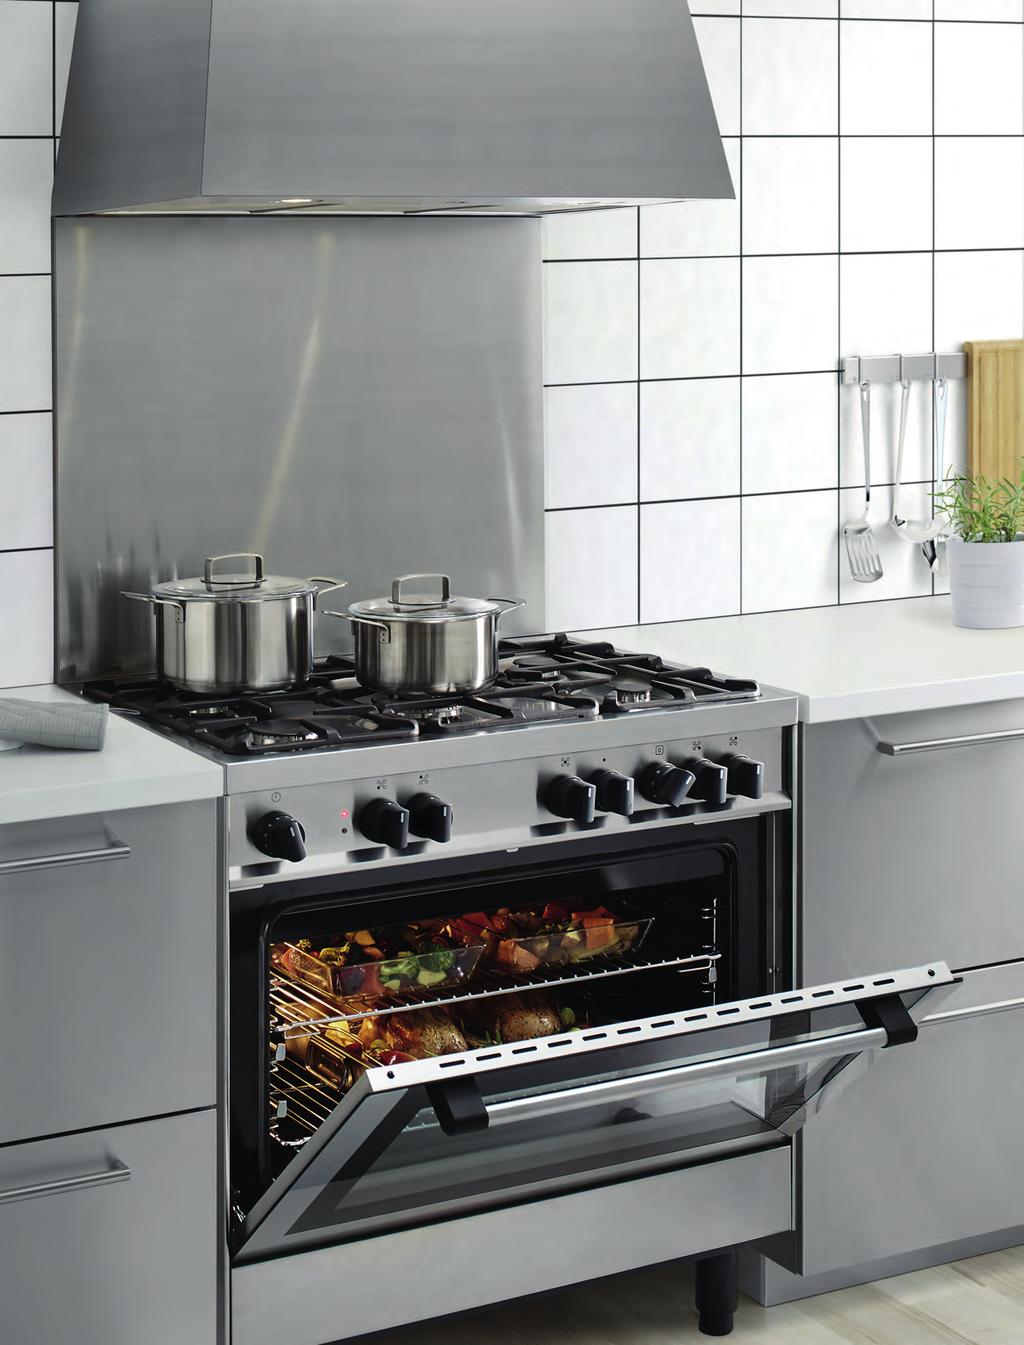 47 FREE-STANDING COOKER GRILJERA cooker Our new free-standing GRILJERA cooker offers a convenient way for you to get a quality cooktop and oven combined. $1799 Stainless steel. 703.168.